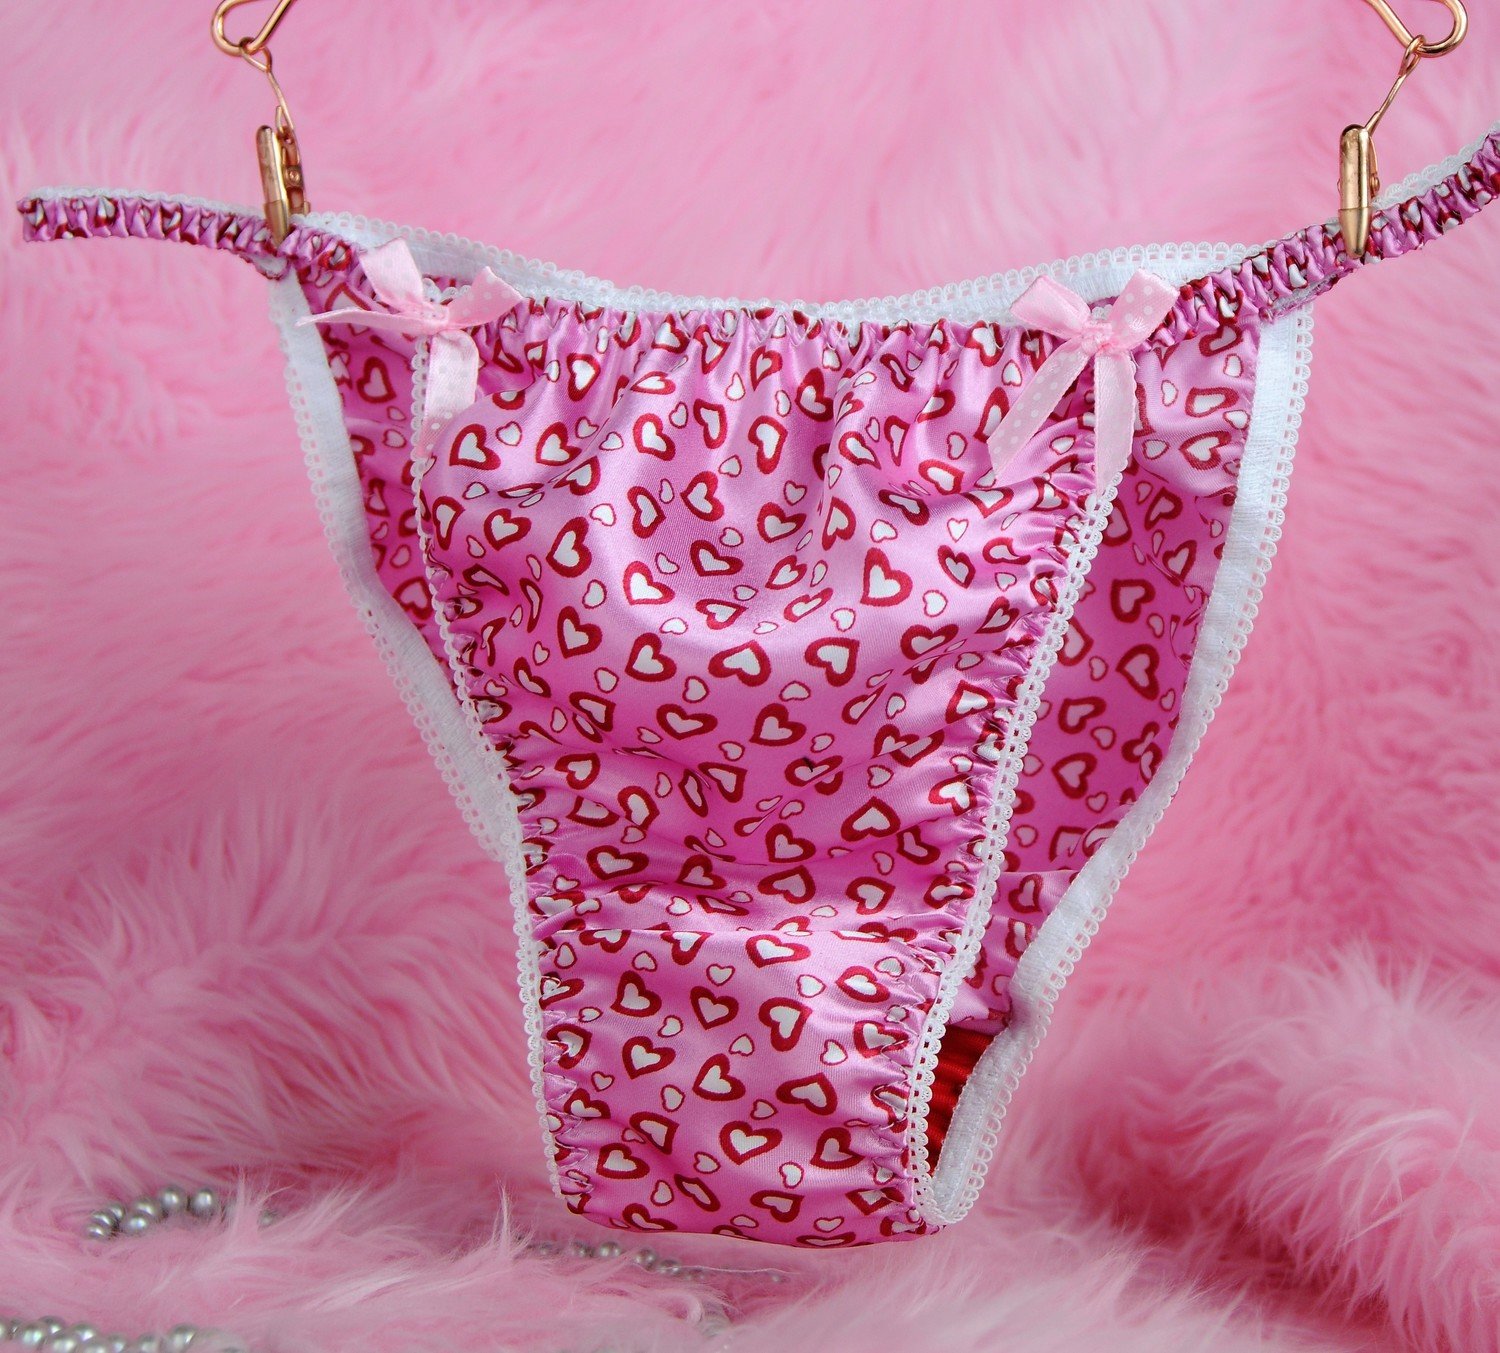 Ania's Poison MANties S - XXL Valentine's Day hearts Pink or Red 100% polyester string bikini sissy mens underwear panties